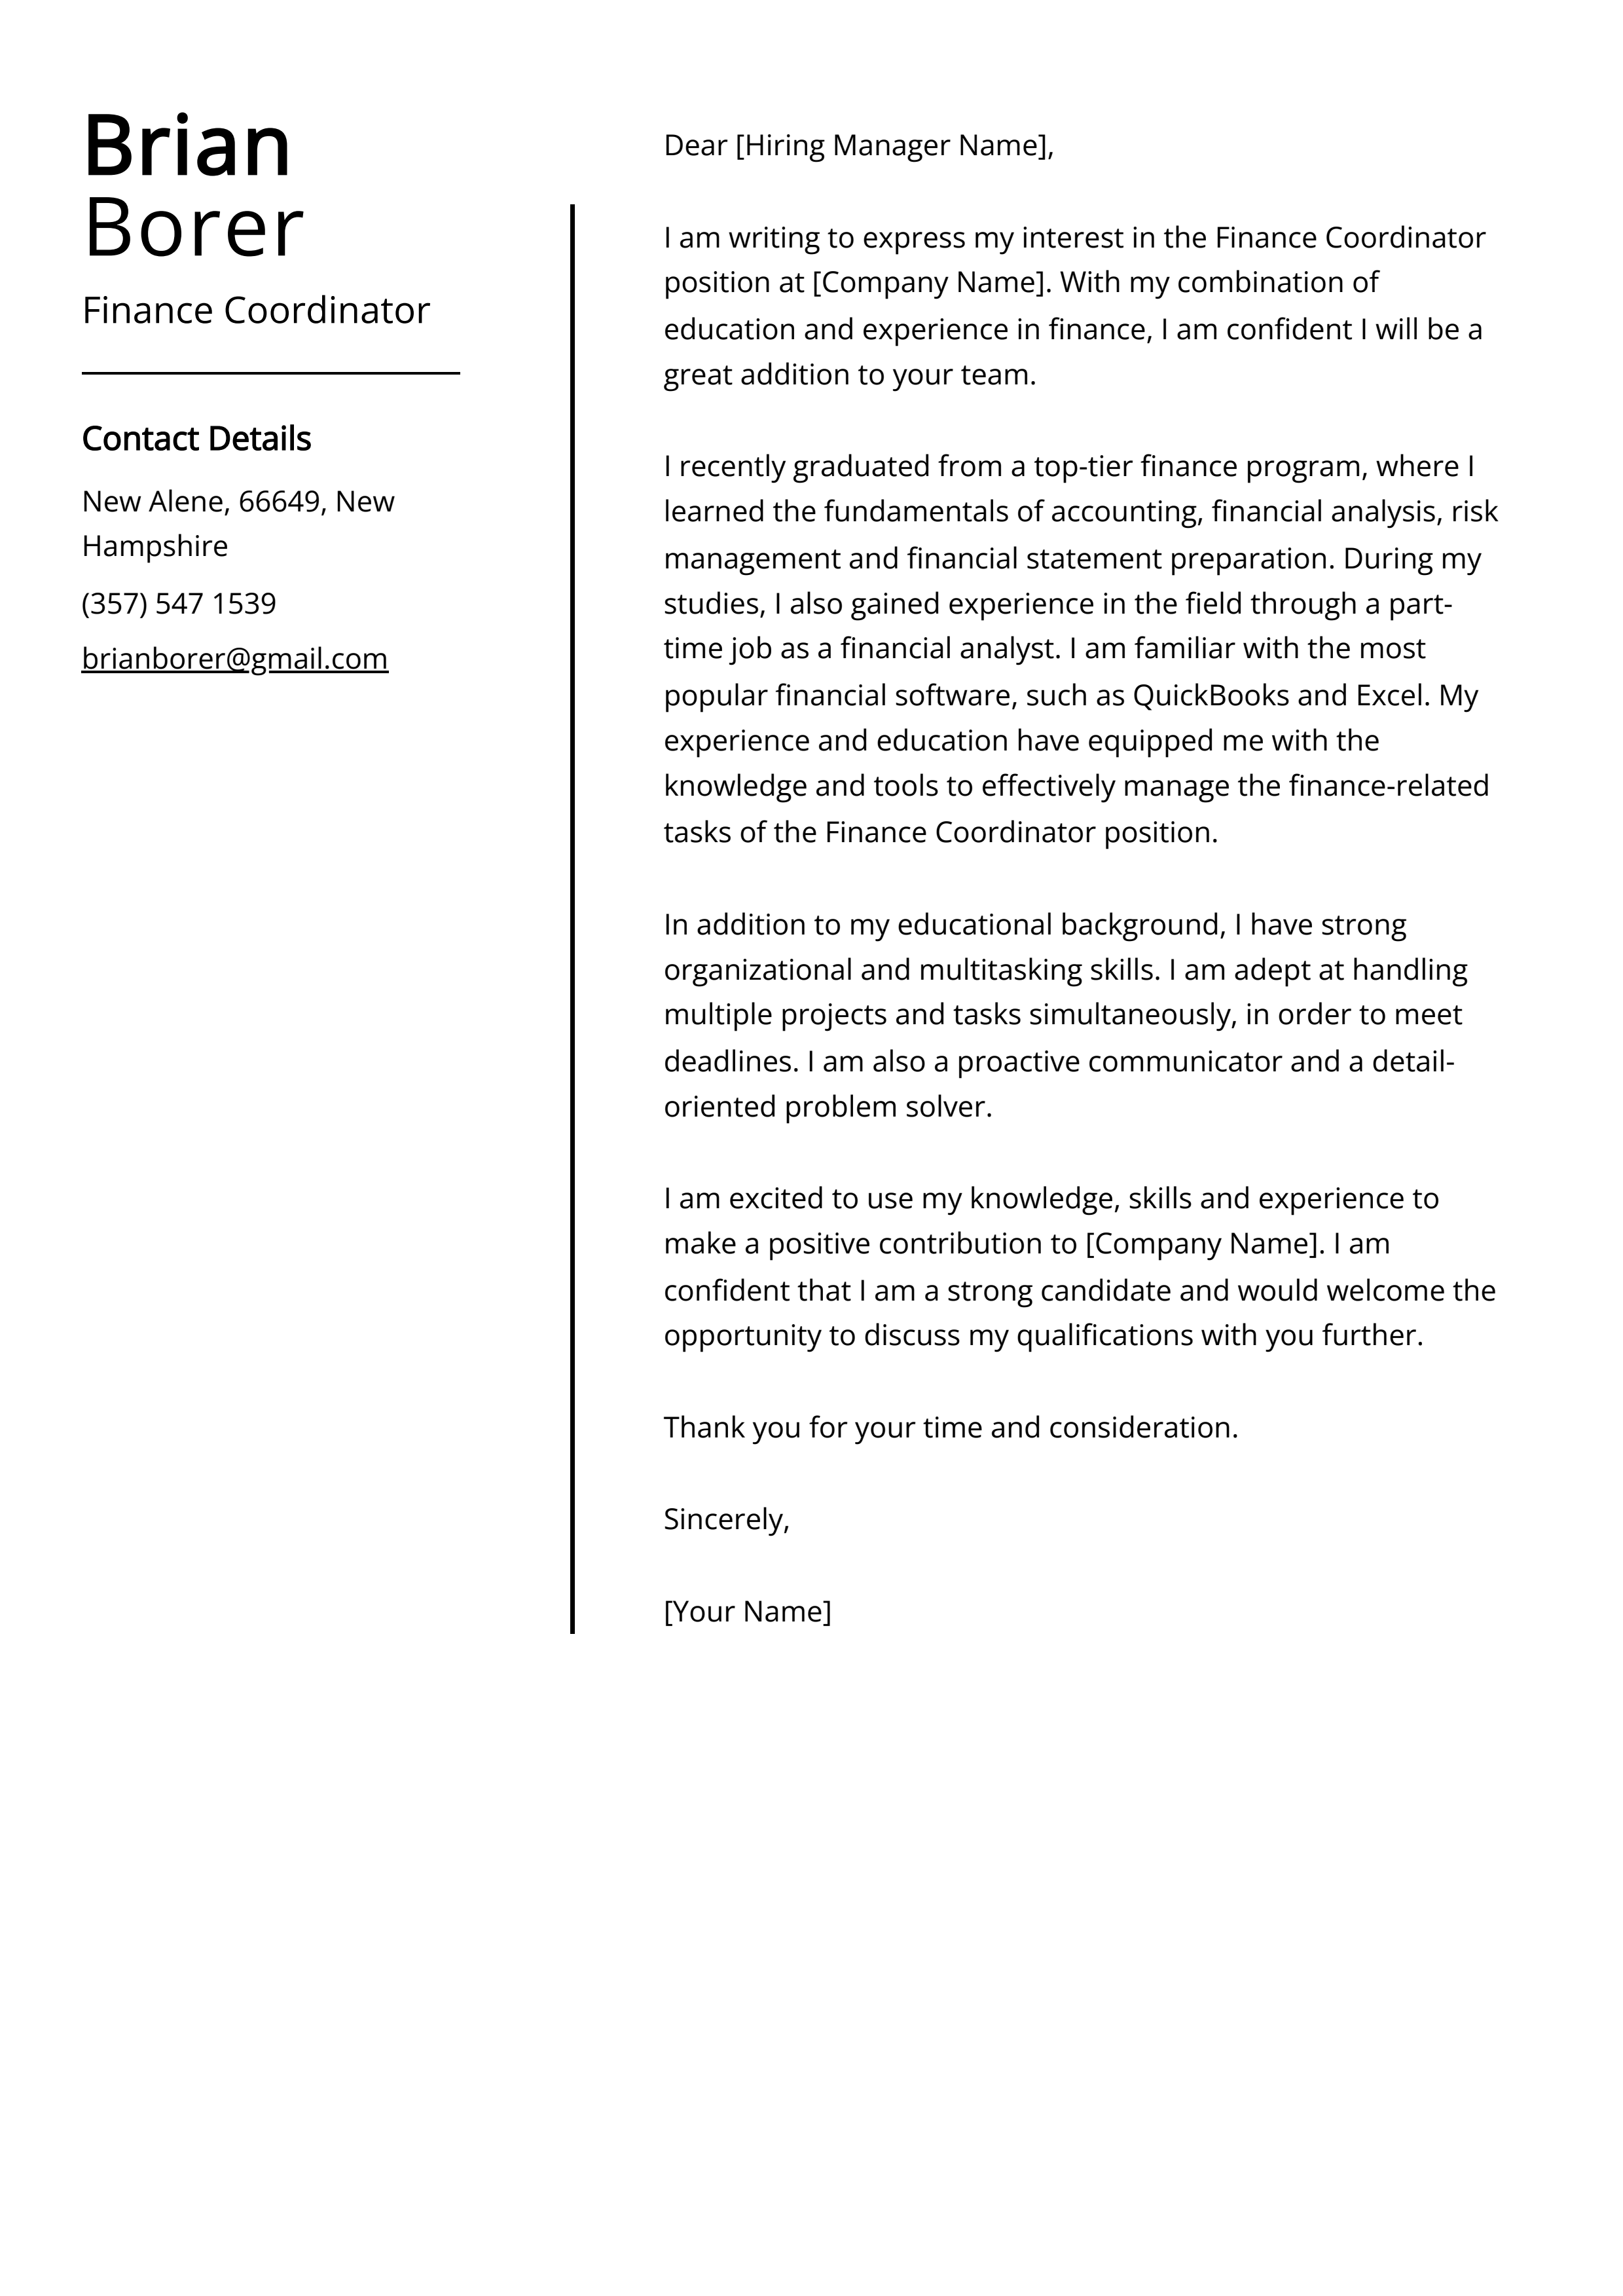 Finance Coordinator Cover Letter Example